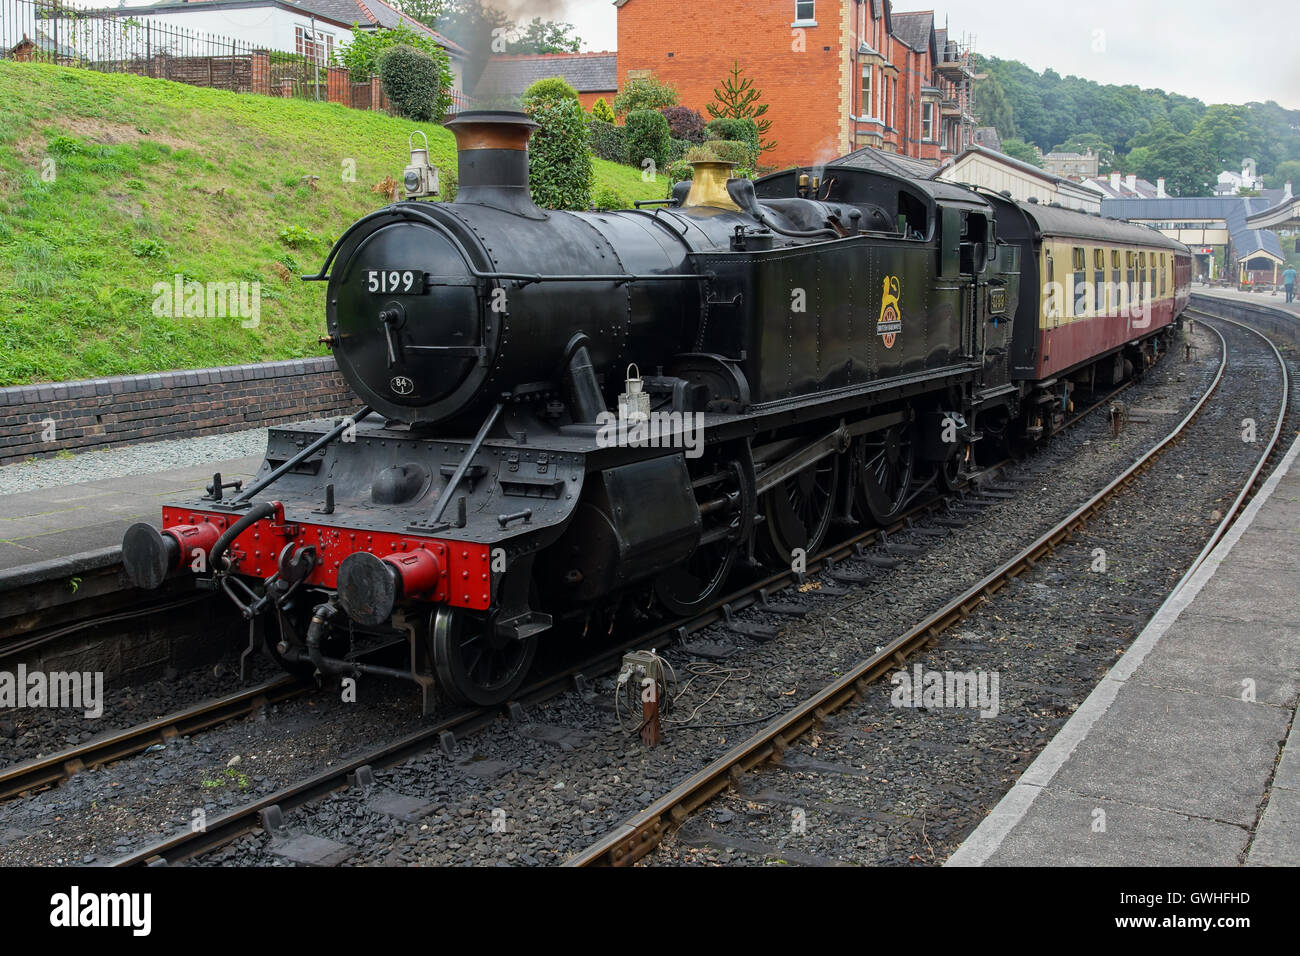 Stanier Locomotive 5199 at Llangollen Railway Station North Wales part of the Llangollen Railway Society rolling stock Stock Photo